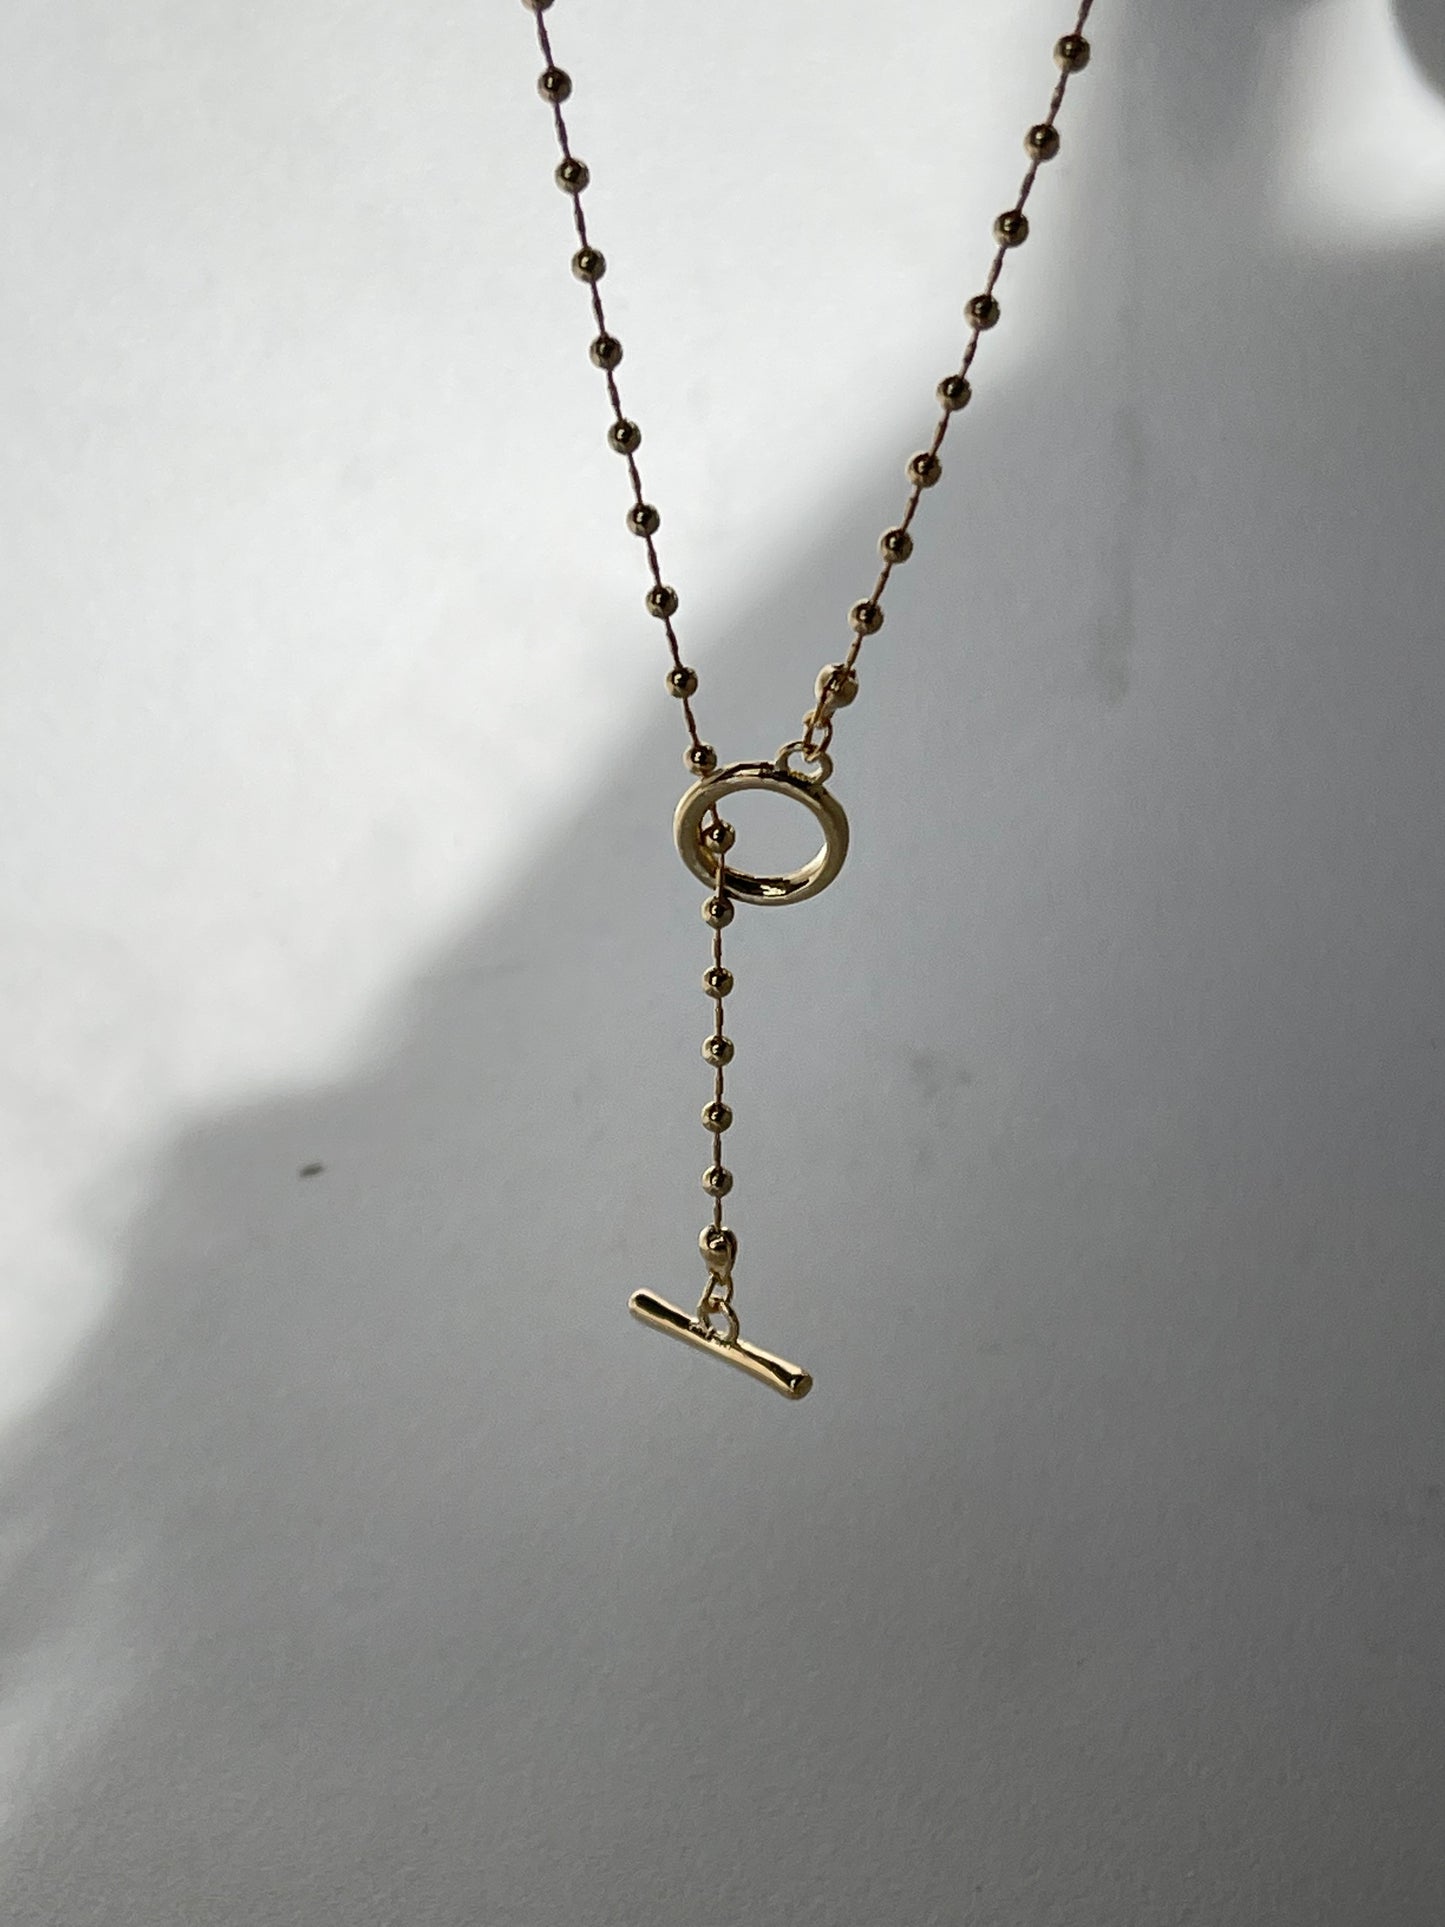 Tarry 14k Gold Plated Toggle Bead Necklace